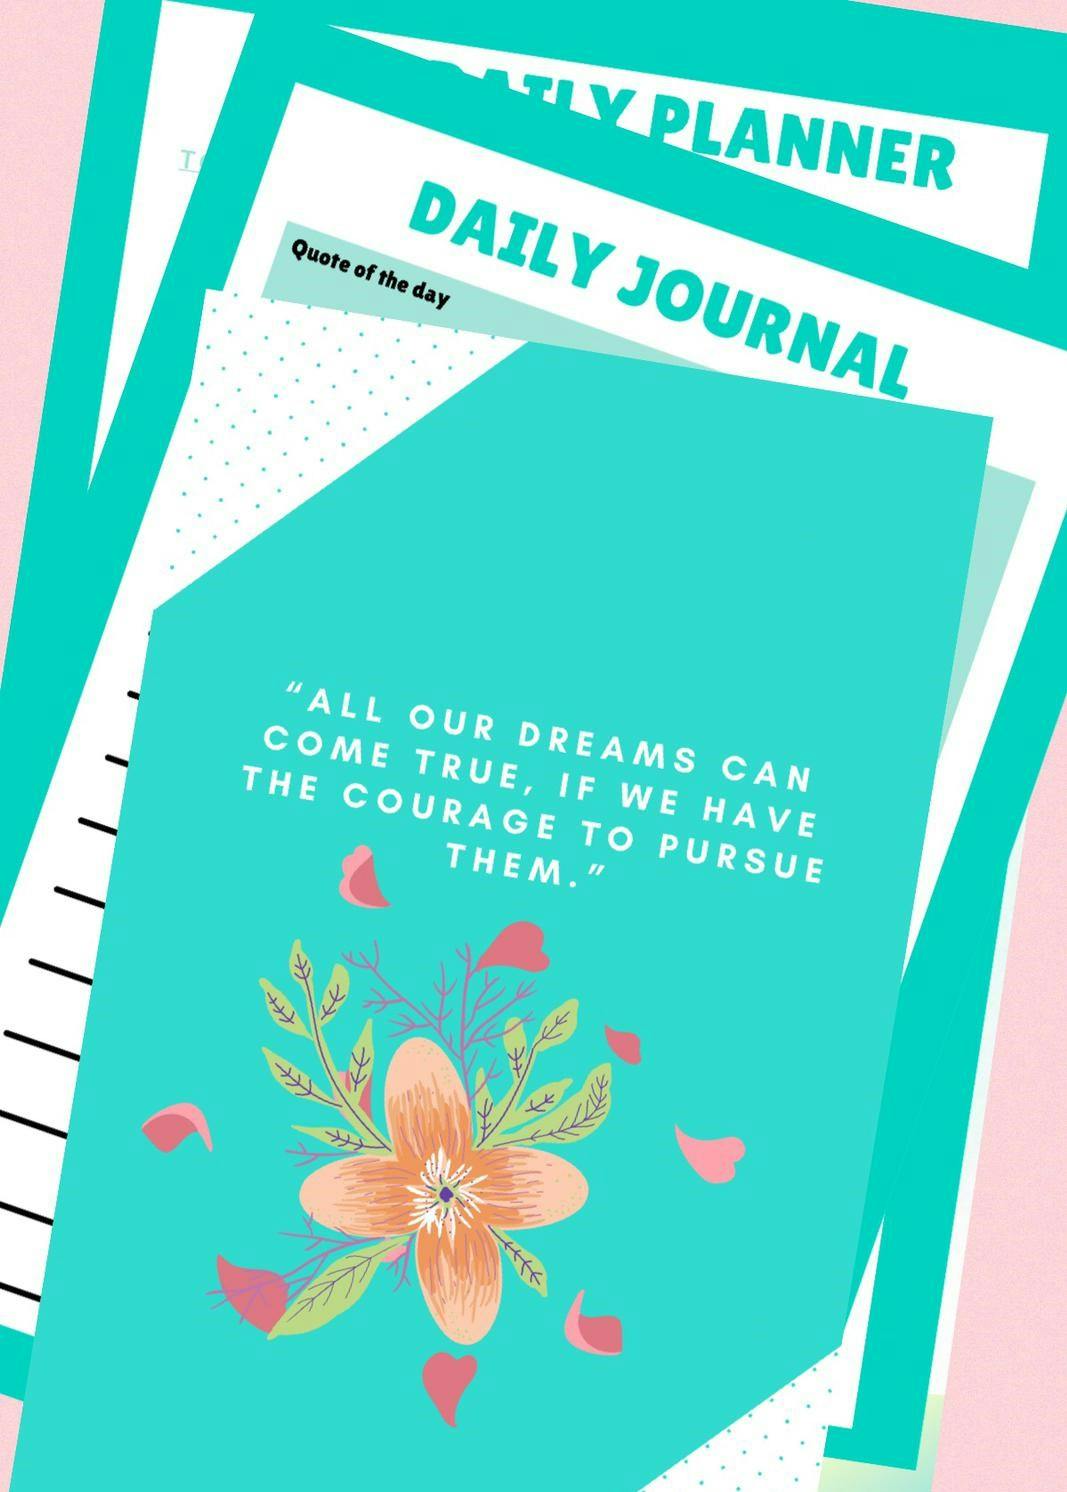 Get my free daily journal templates